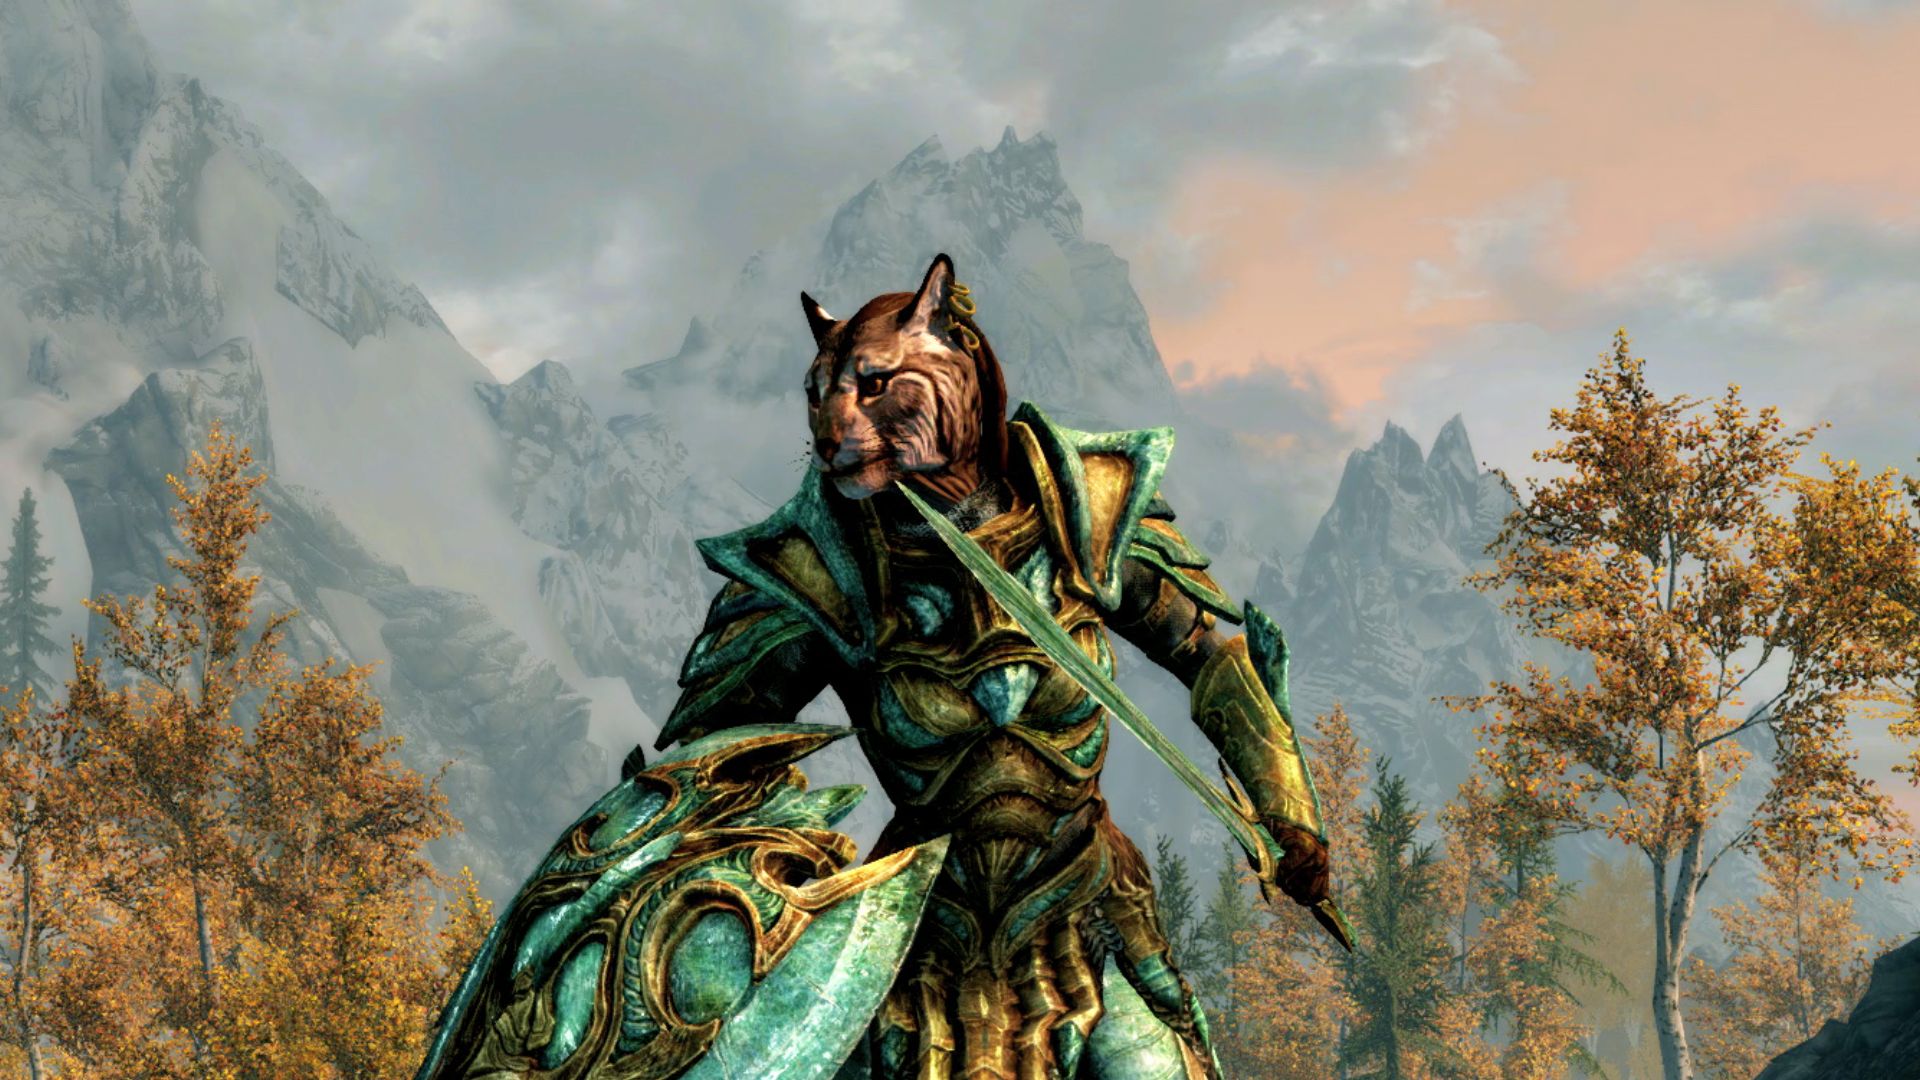 This Skyrim sale is the perfect antidote after too much Starfield